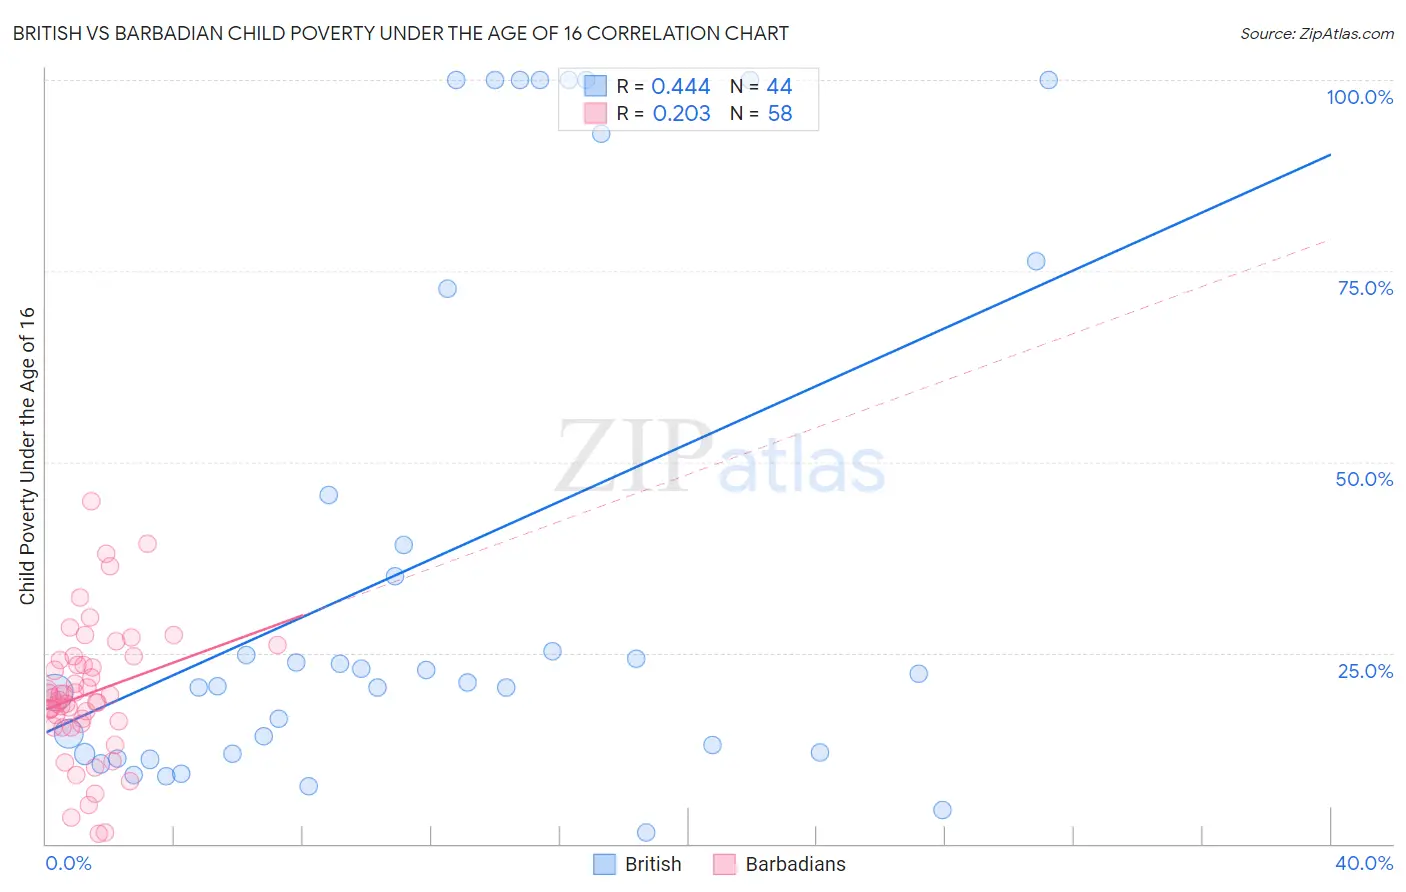 British vs Barbadian Child Poverty Under the Age of 16